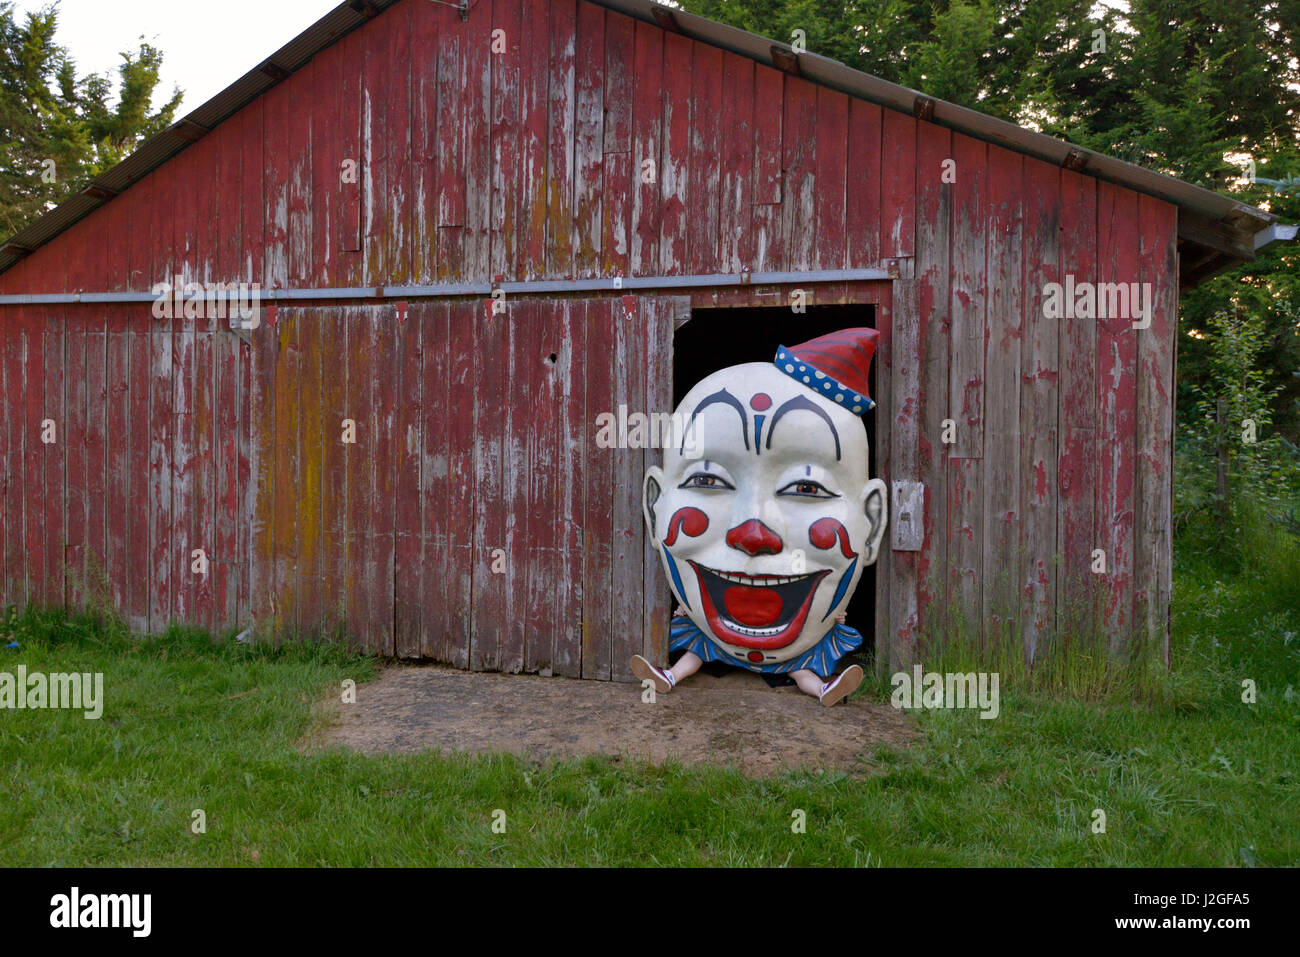 USA, Oregon, Oregon City. Person holding clown face in door of barn. Credit as: Steve Terrill / Jaynes Gallery / DanitaDelimont.com (Large format sizes available) Stock Photo